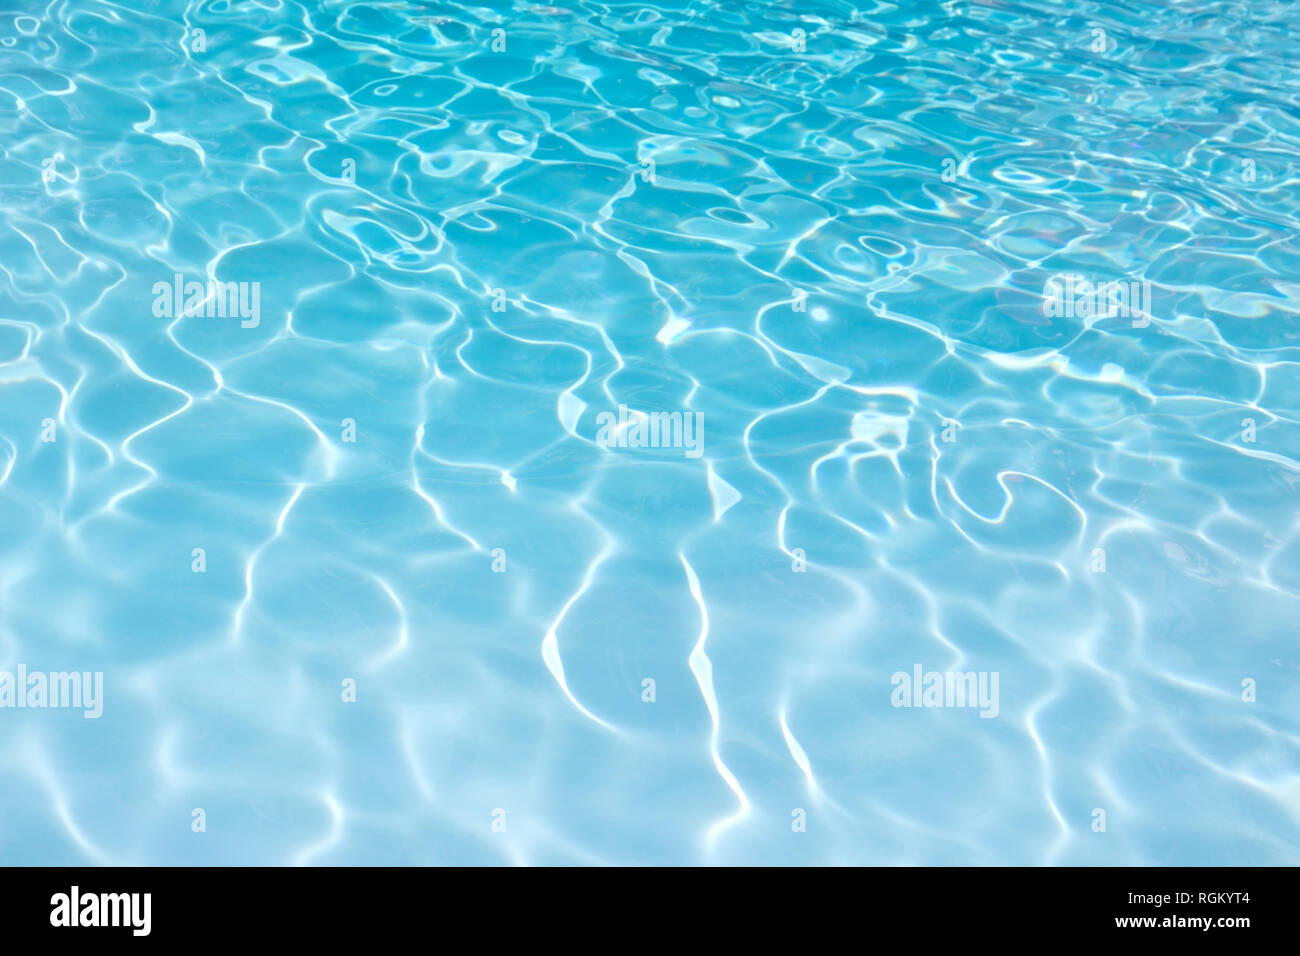 The blue shallow water in the pool Stock Photo